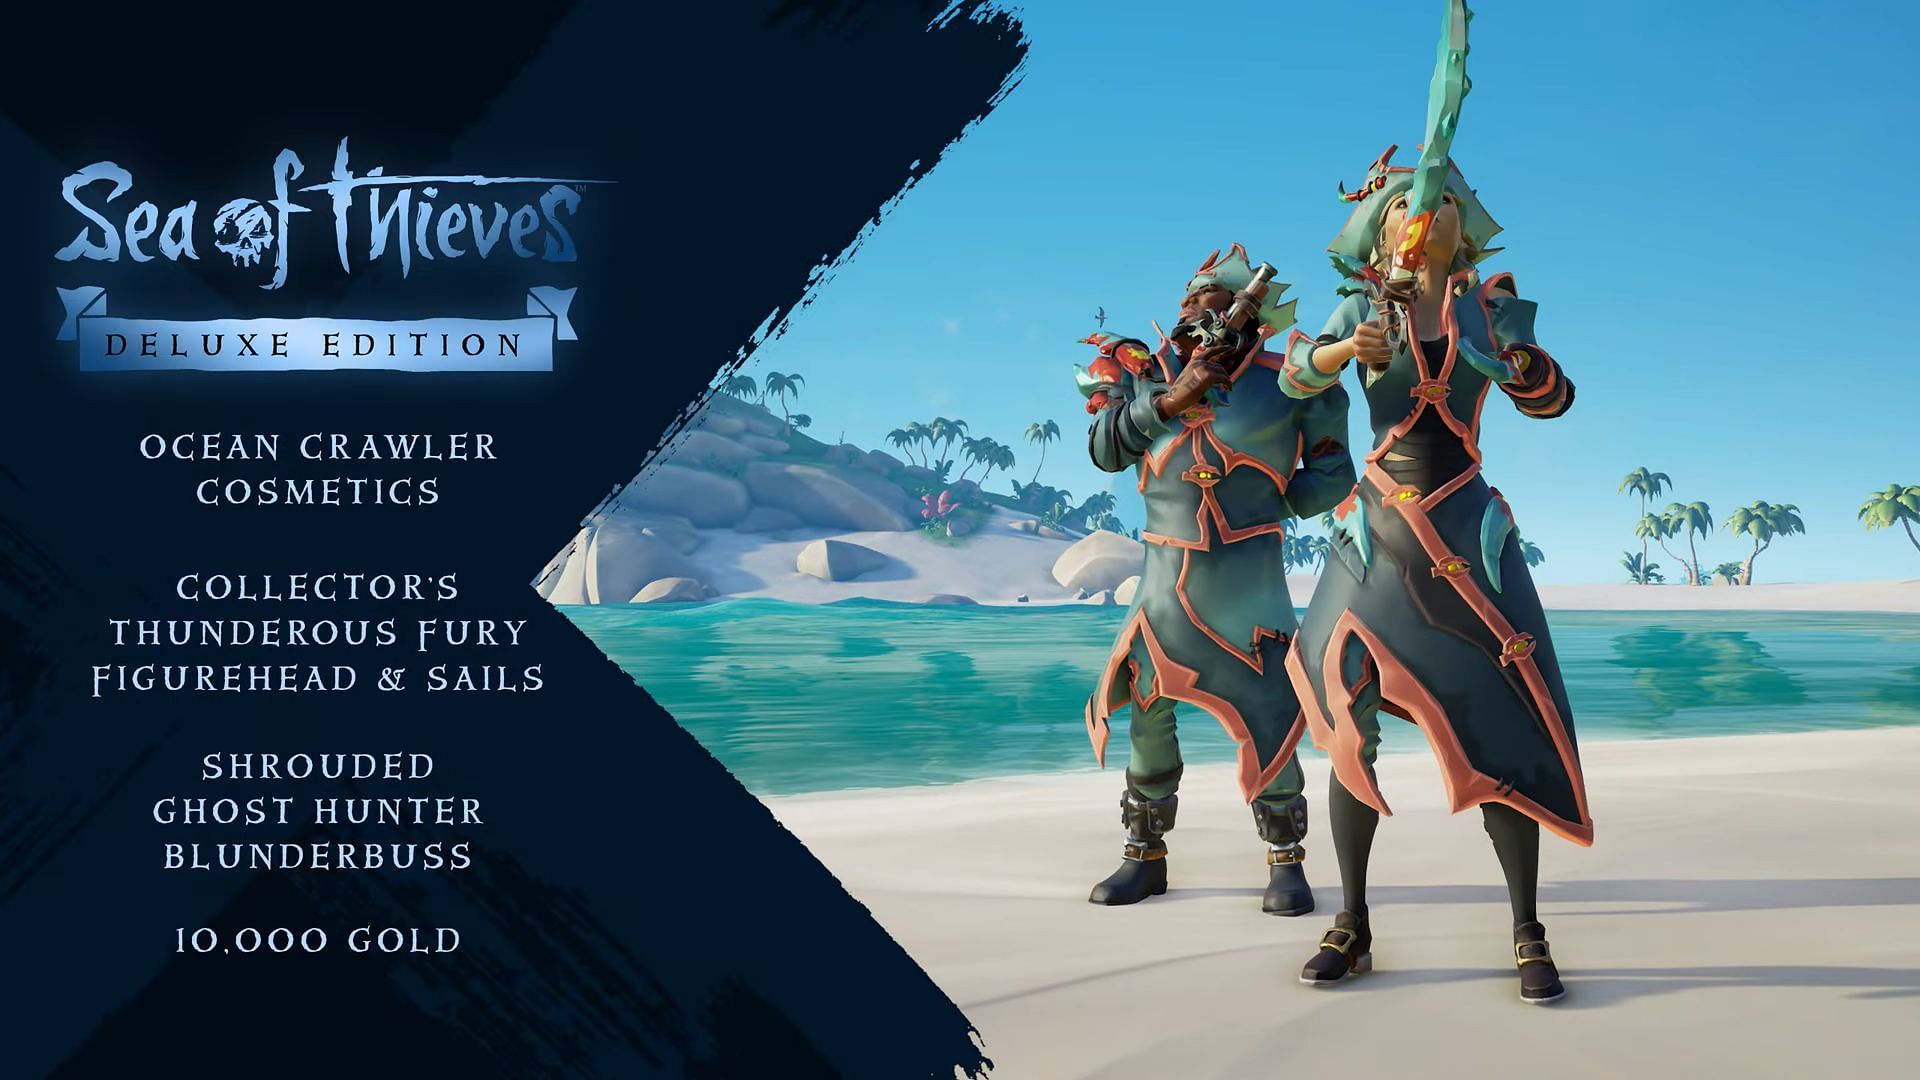 Sea of Thieves Deluxe Edition at a glance (Image via Rare)